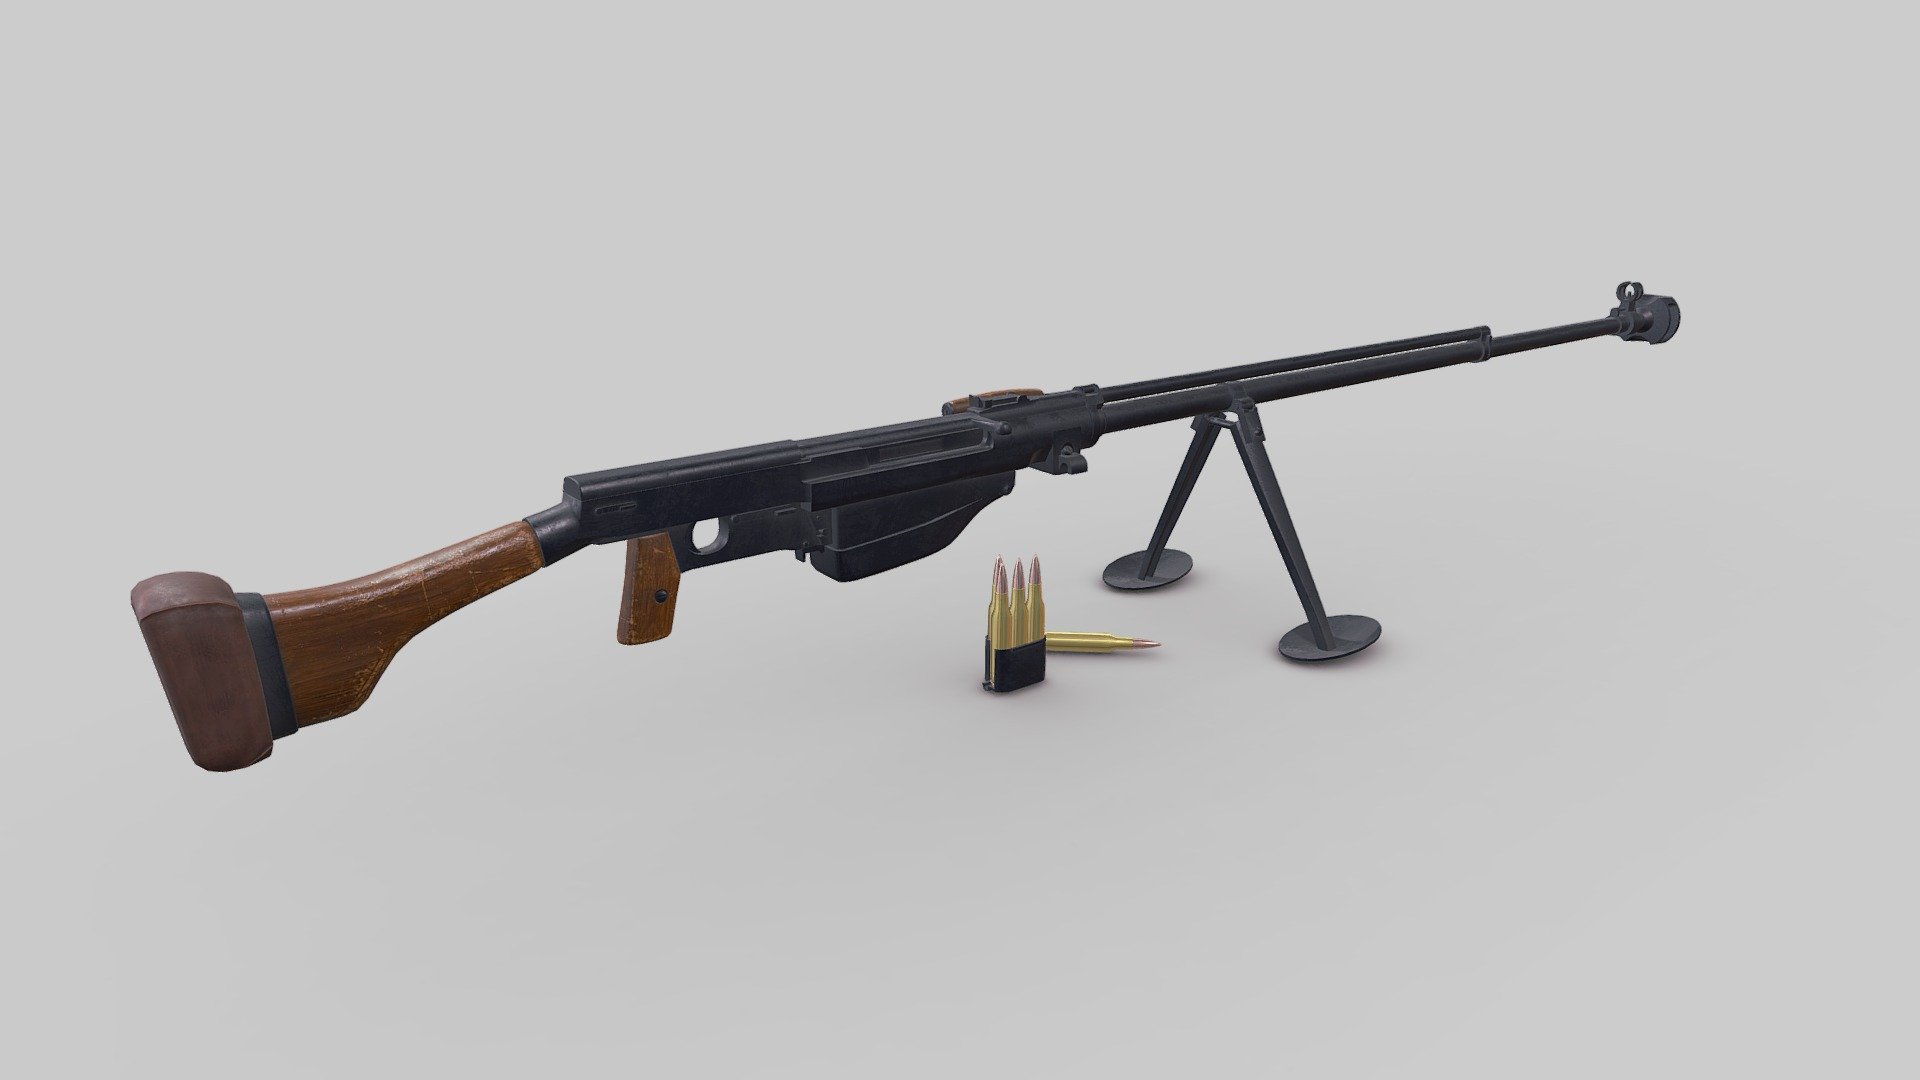 PTRS-41




Low-poly ready to use in game AR/VR

separate objects for animation (clip, bullet, trigger, bolt, bipod)

textures are in PNG format 4096x4096 PBR metalness 1 set.

File Units: Centimeter.

Available formats: MAX 2018 and 2015, OBJ, MTL, FBX.

If you need any other file format you can always request it.

All formats include materials and textures.
 - PTRS-41 Anti-tank Rifle Low-poly PBR - Buy Royalty Free 3D model by MaX3Dd 3d model